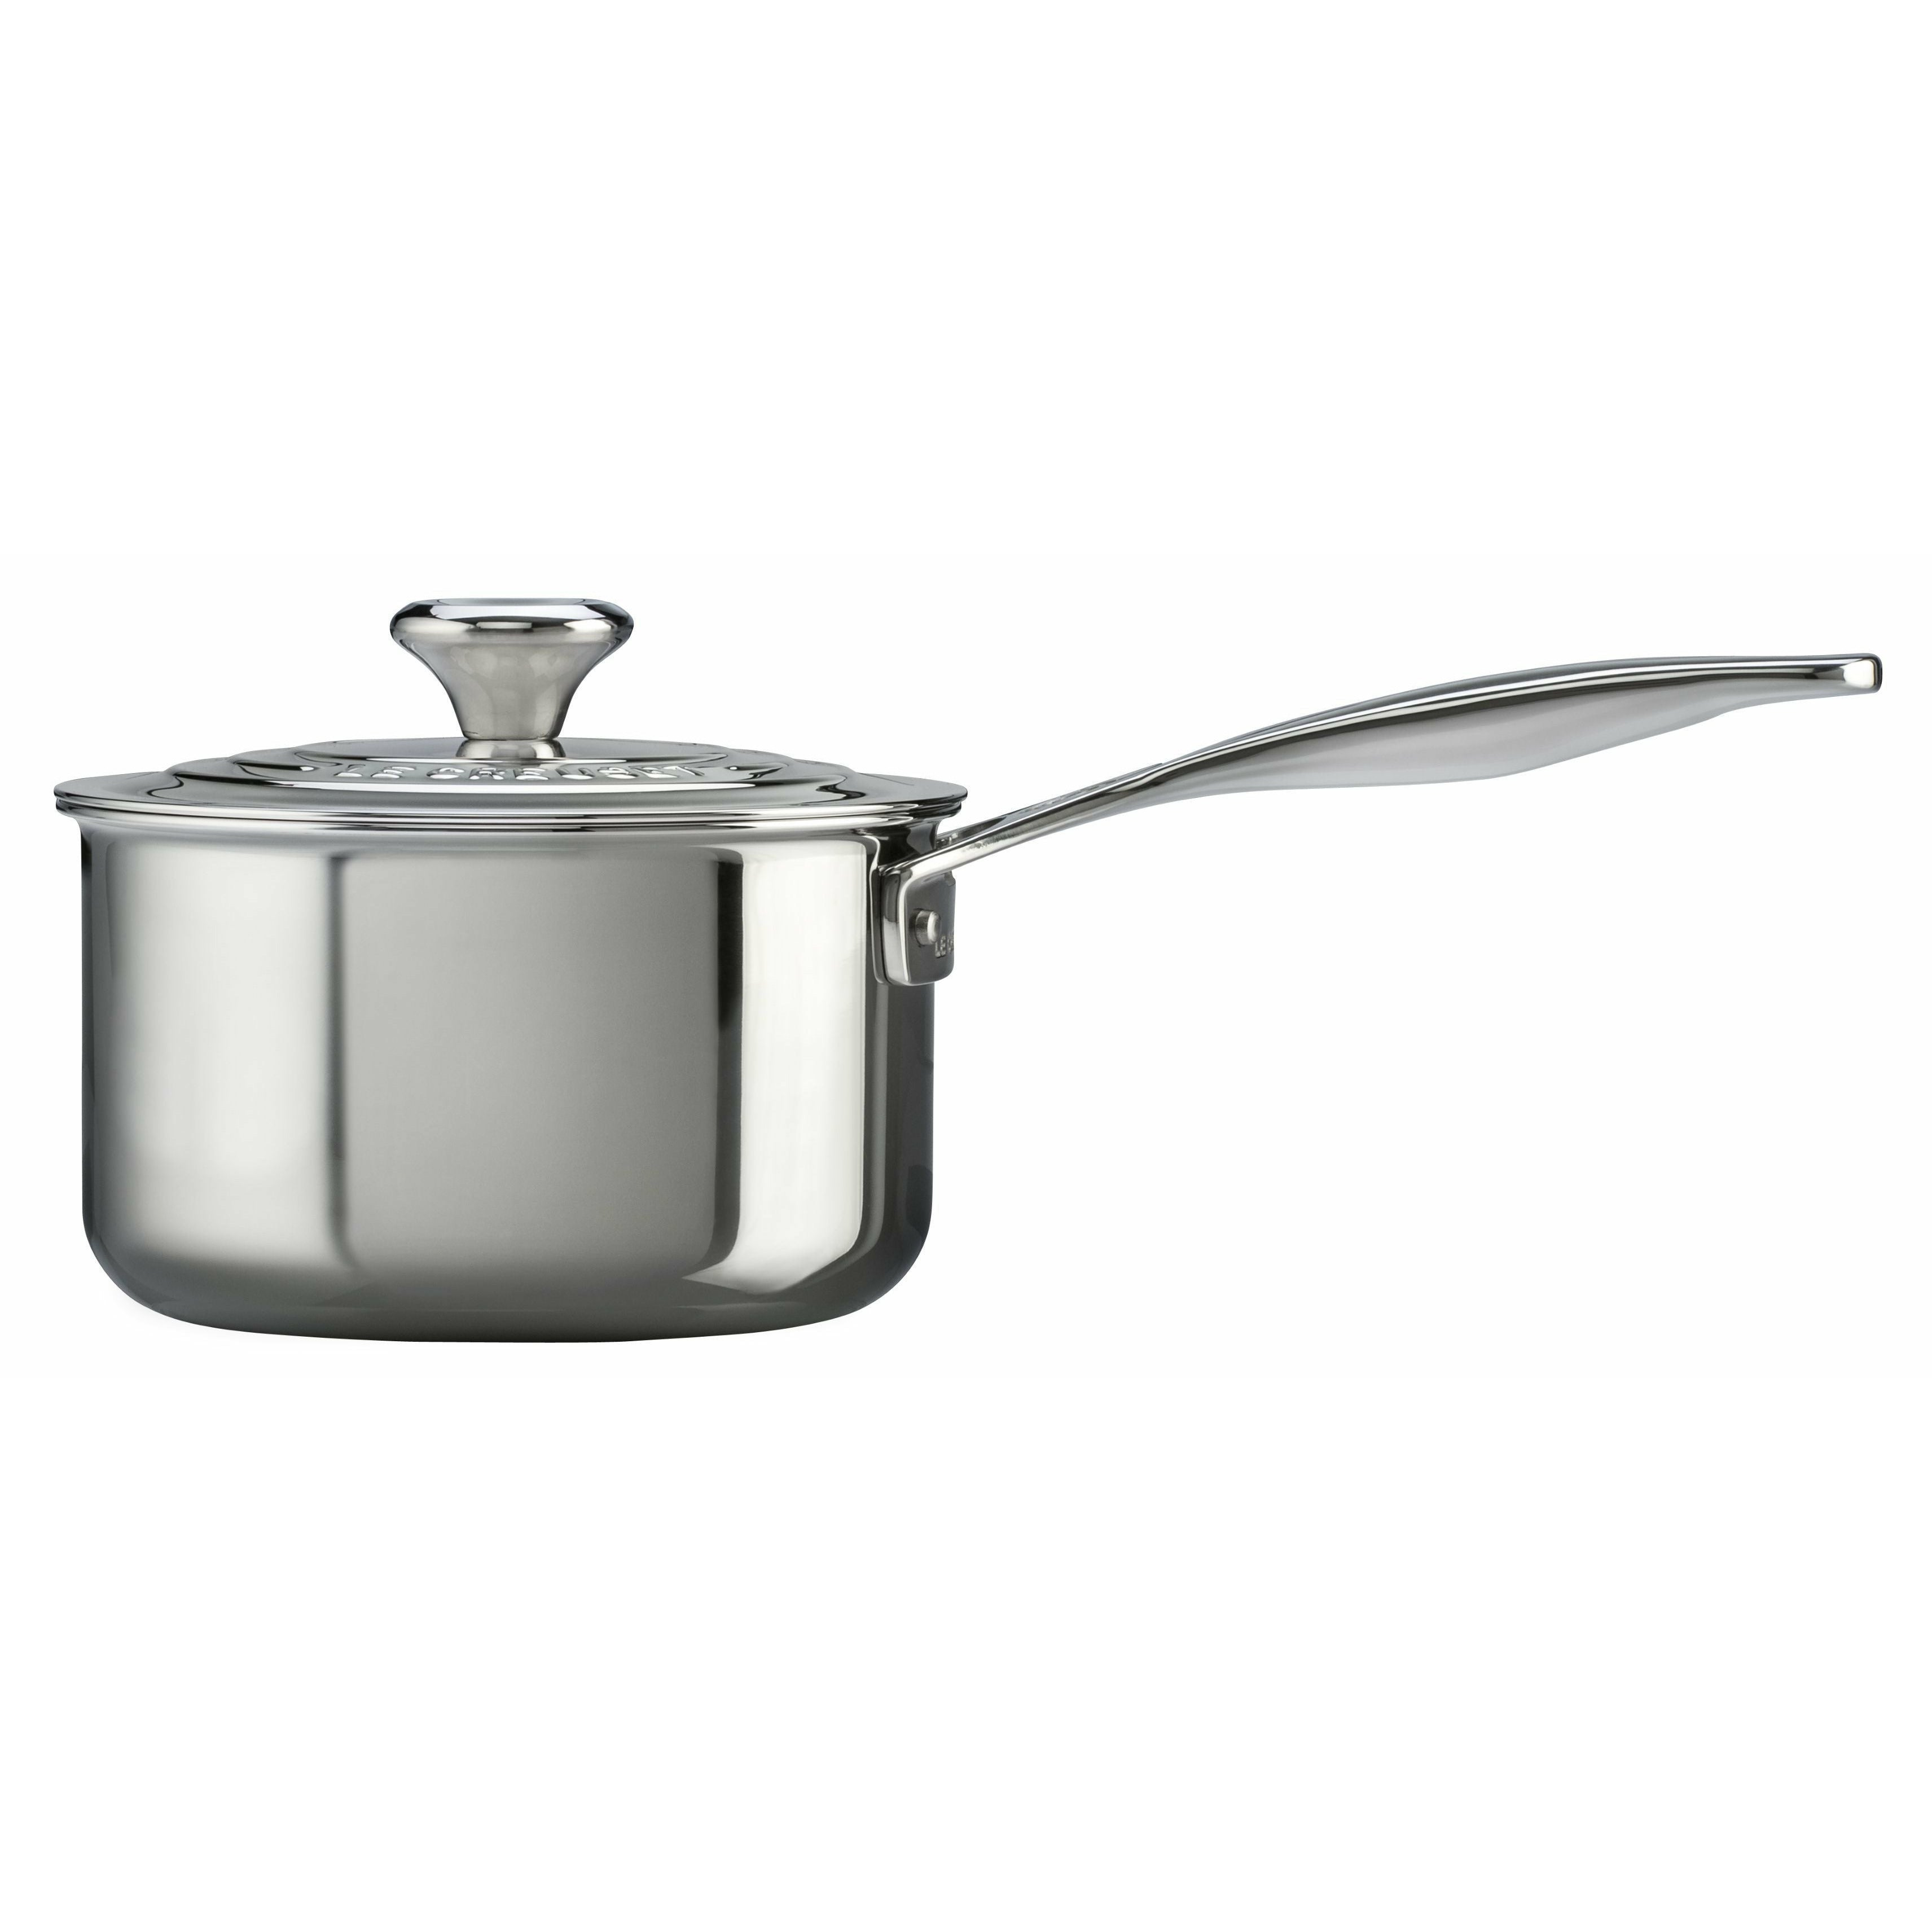 Le Creuset Signature Stainless Steel Saucepan 2.8 L With Lid